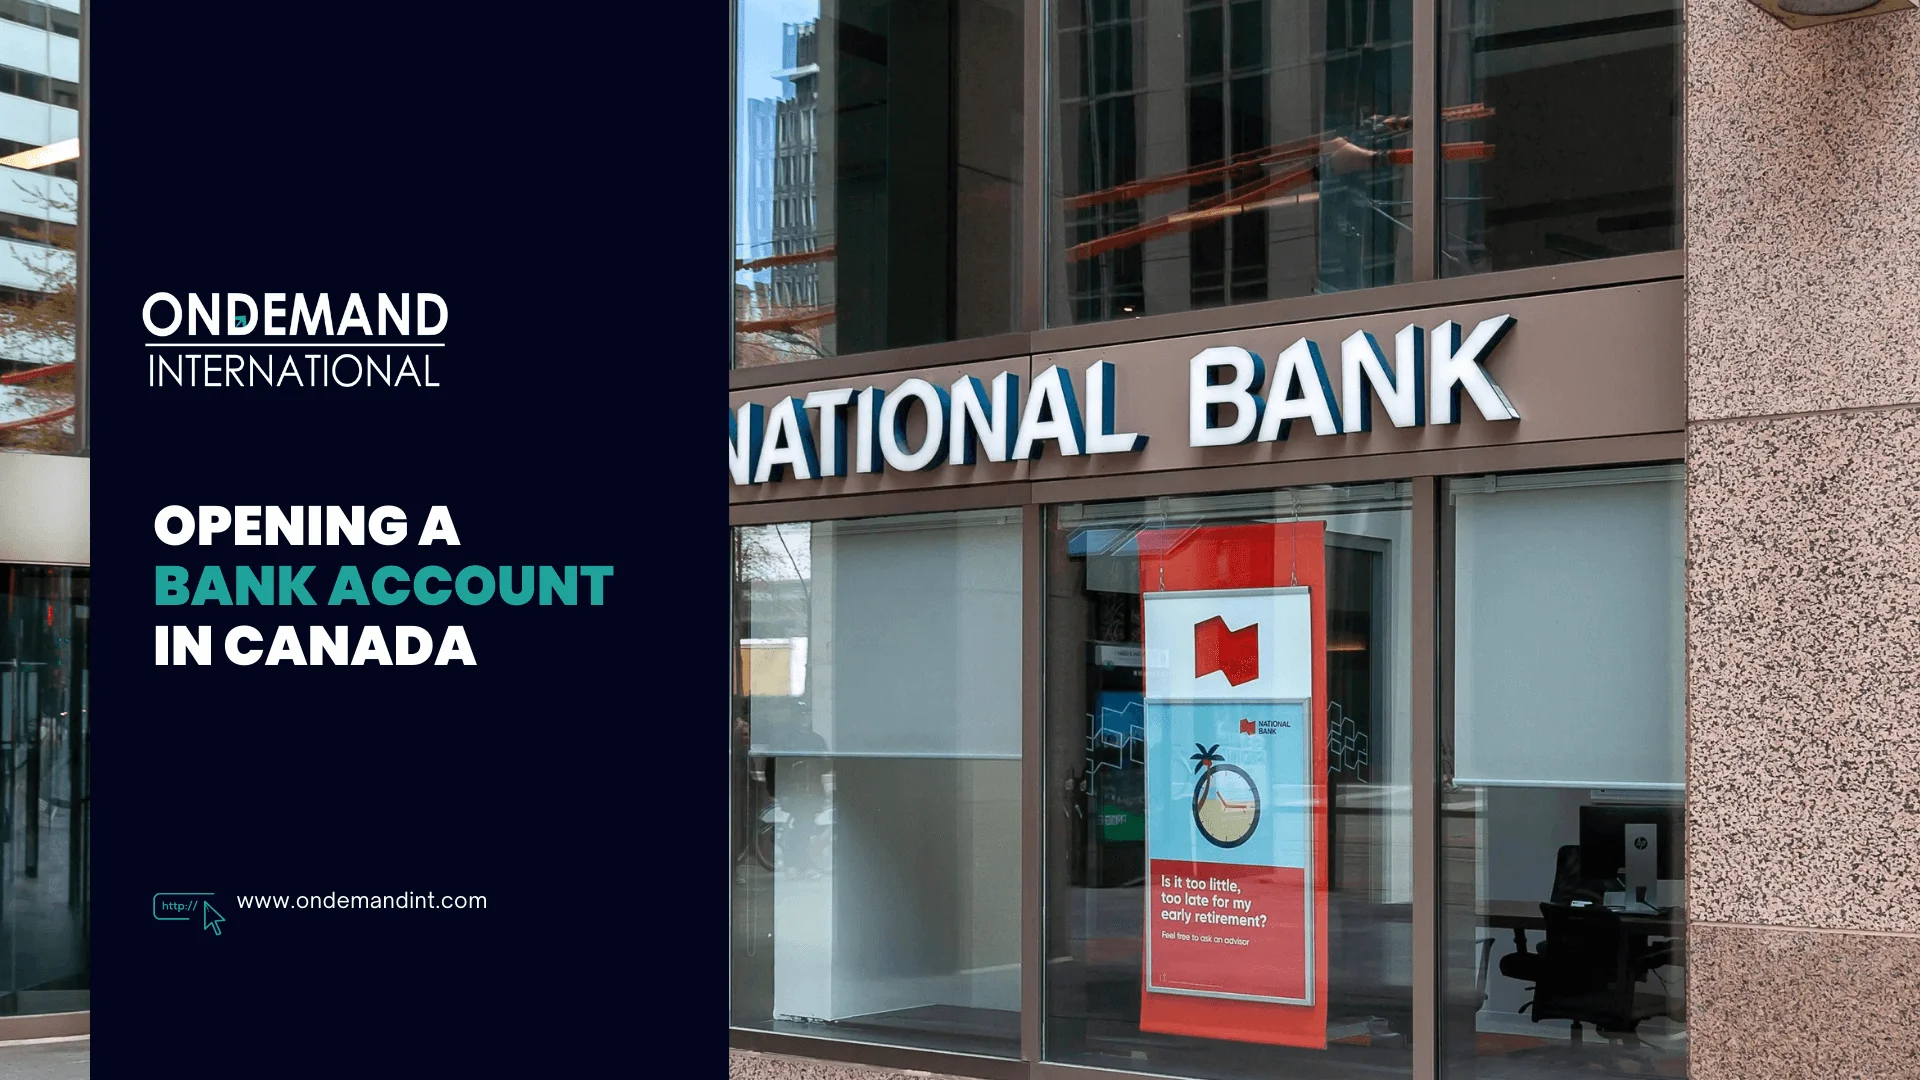 Opening A Bank Account In Canada In 7 Easy Steps: Types of Account & Leading Banks